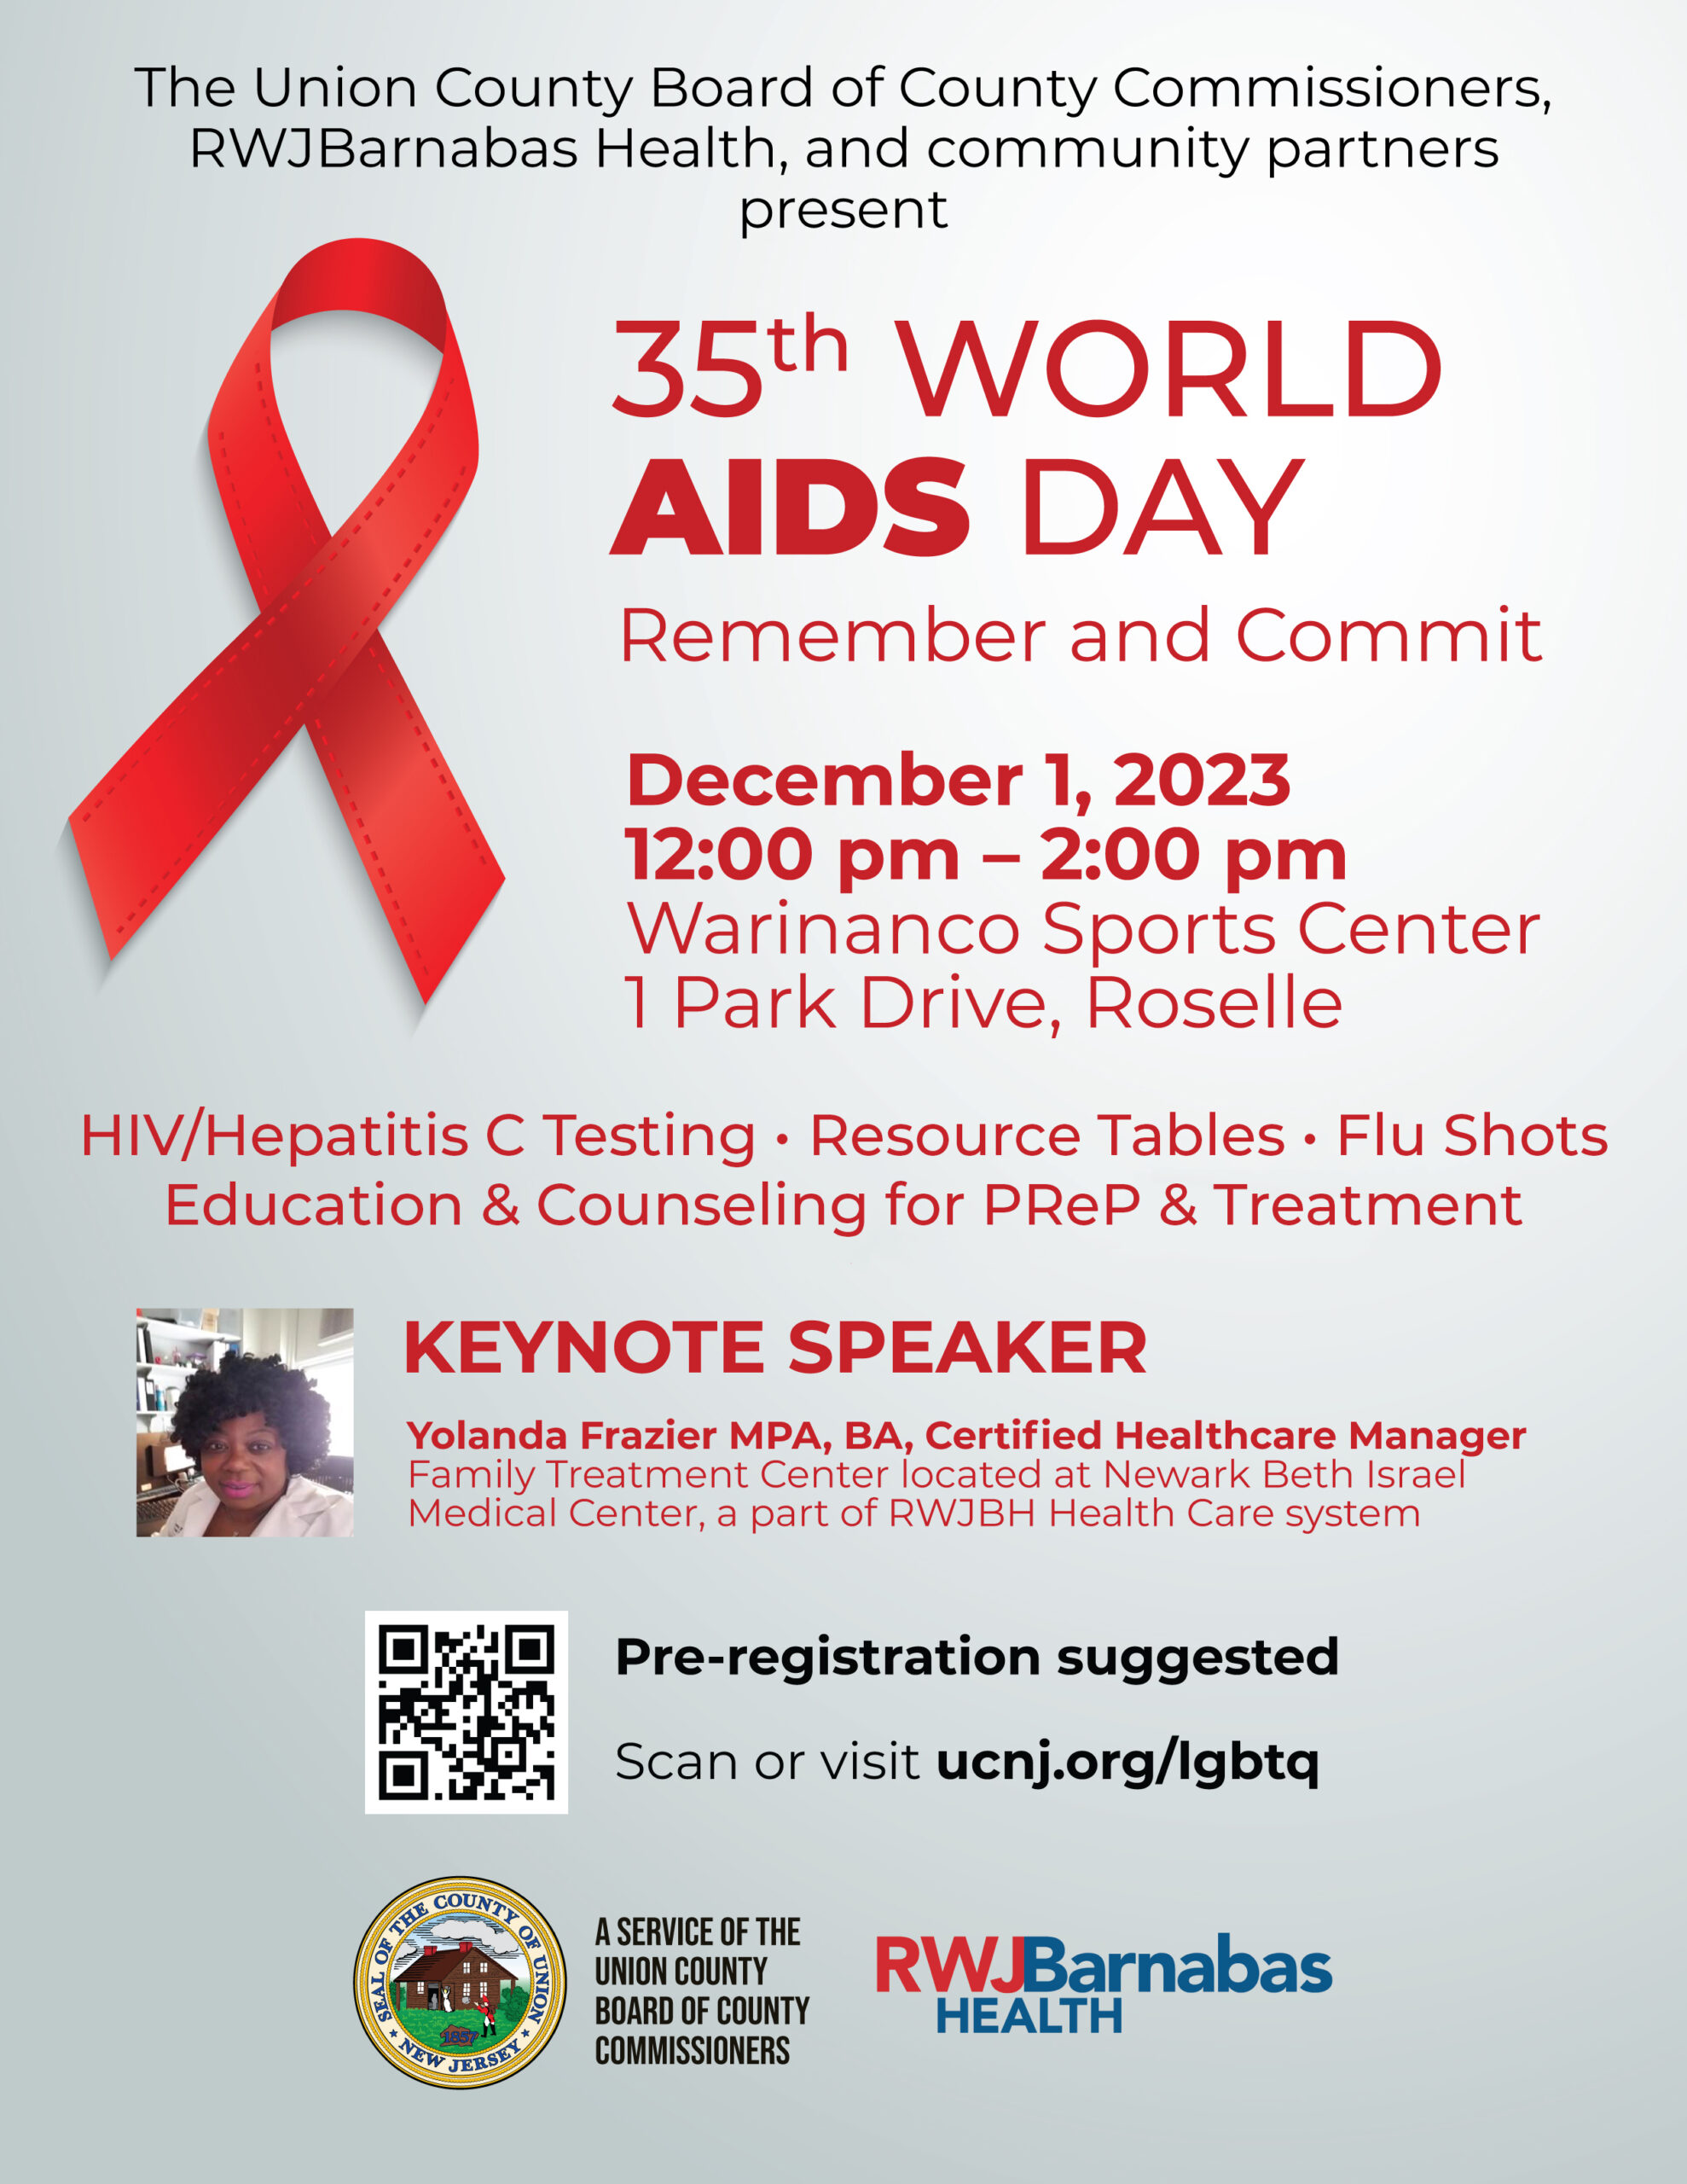 Union County Announces Commemoration of World AIDS Day – Remember and Commit: 35 Years of Progress